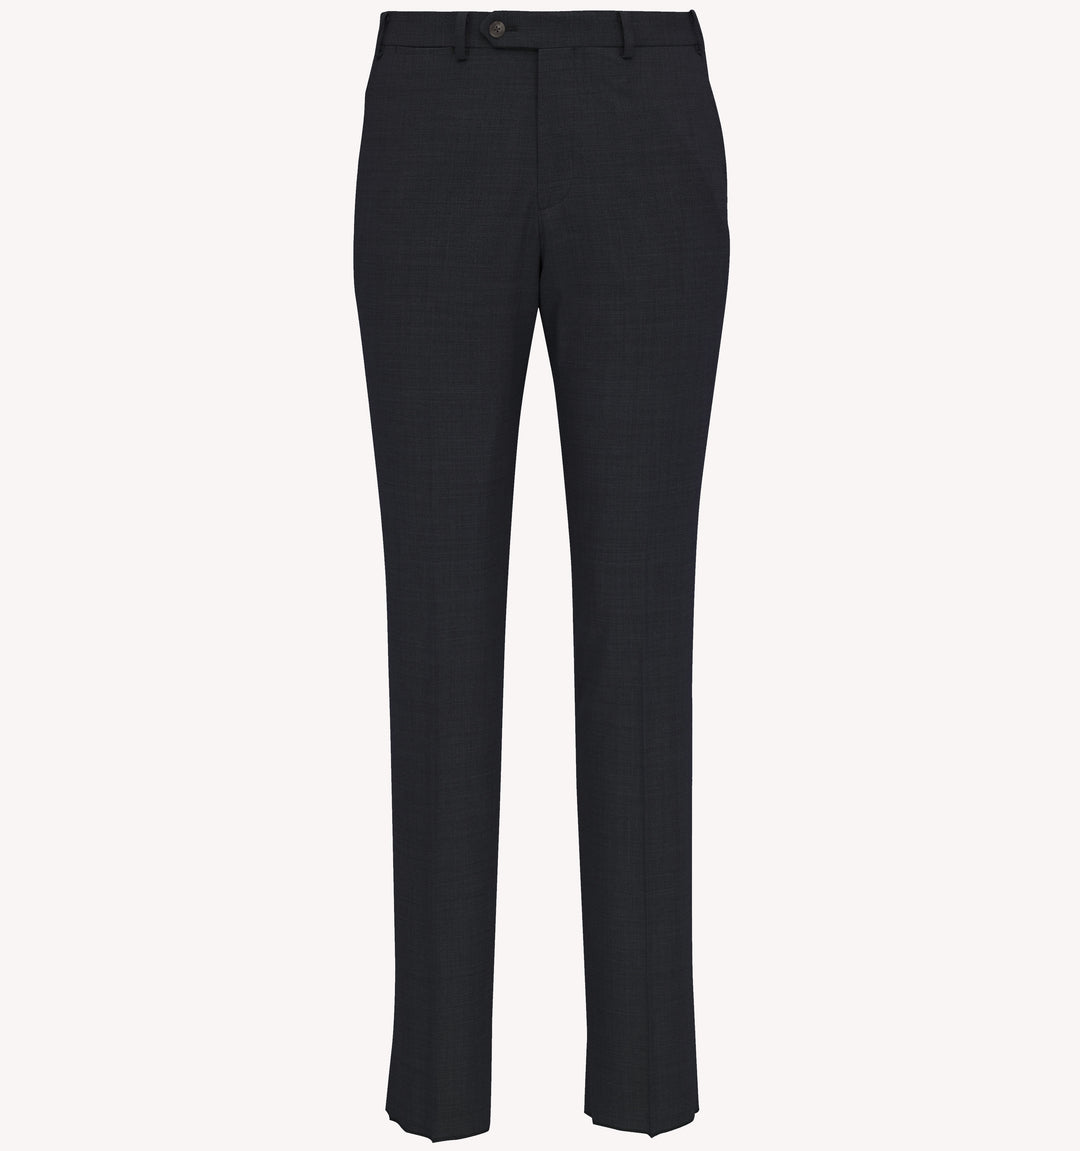 Munro Dress Trousers in Charcoal